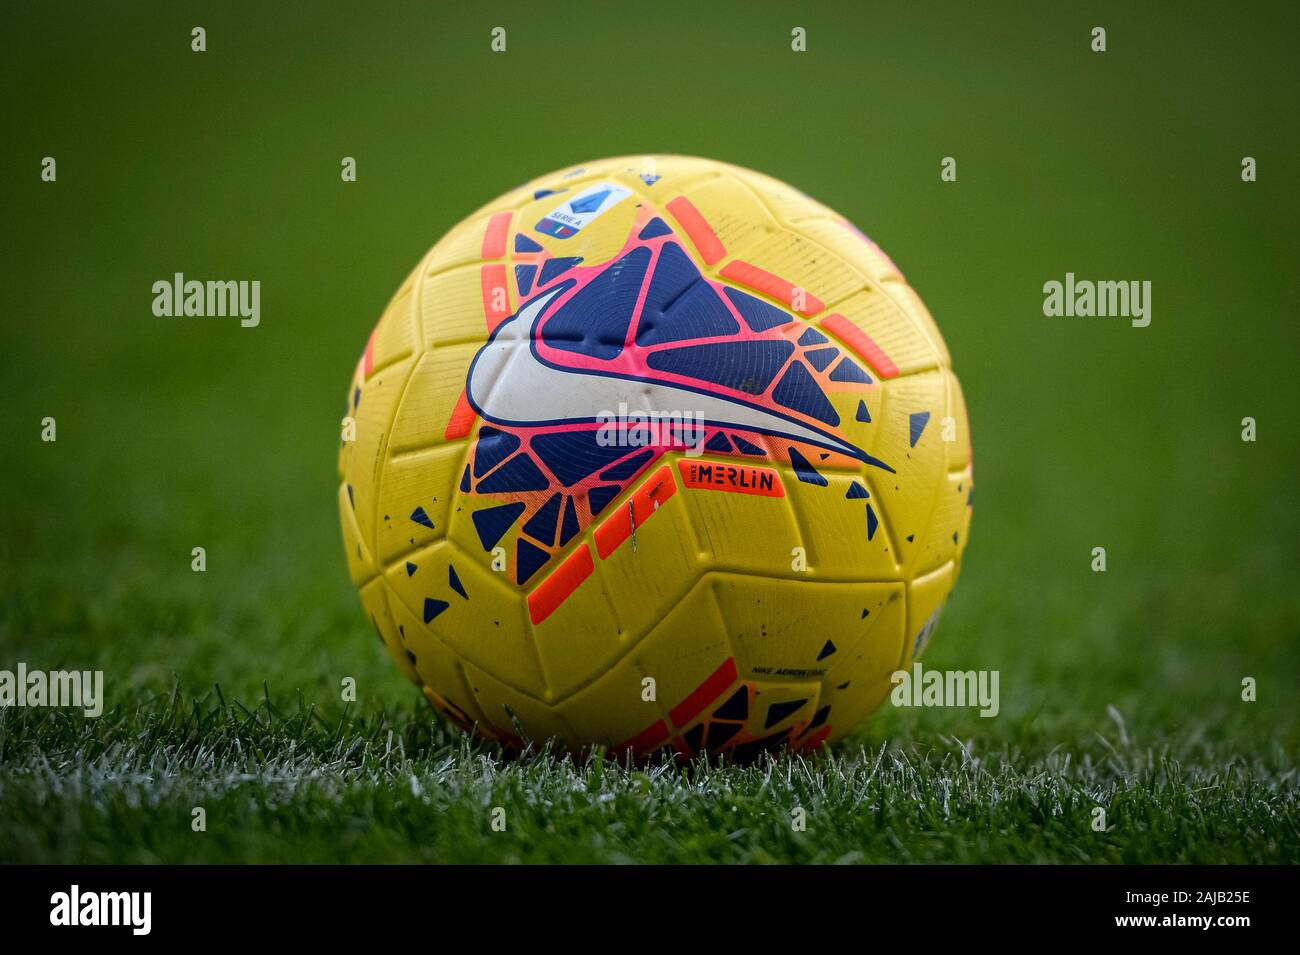 Turin, Italy - 08 December, 2019: Official Seria A match ball Nike Merlin Hi -Vis is pictured during the Serie A football match between Torino FC and  ACF Fiorentina. Torino FC won 2-1